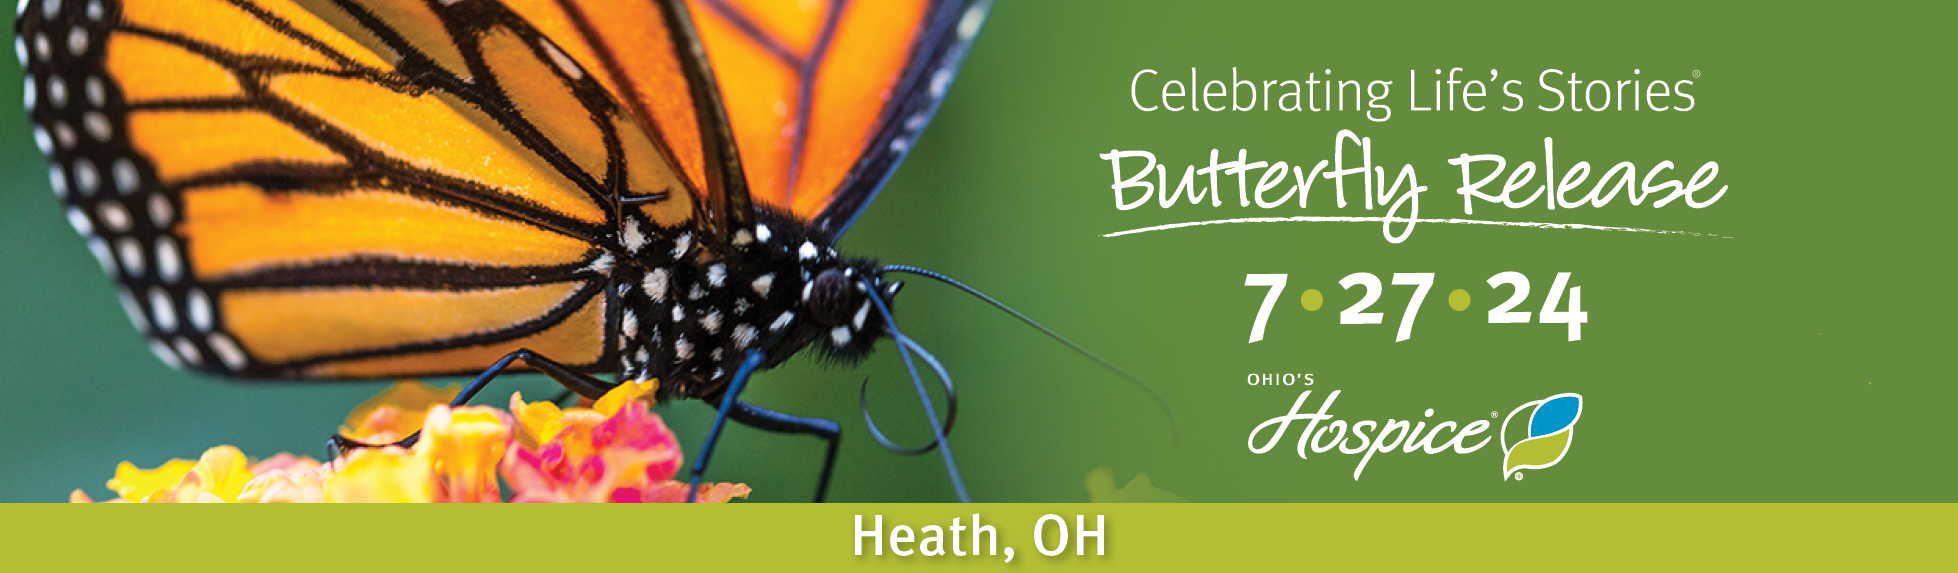 Ohio's Hospice of Central Ohio Celebrating Life's Stories 2024 Butterfly Release 7.27.24 Heath, OH